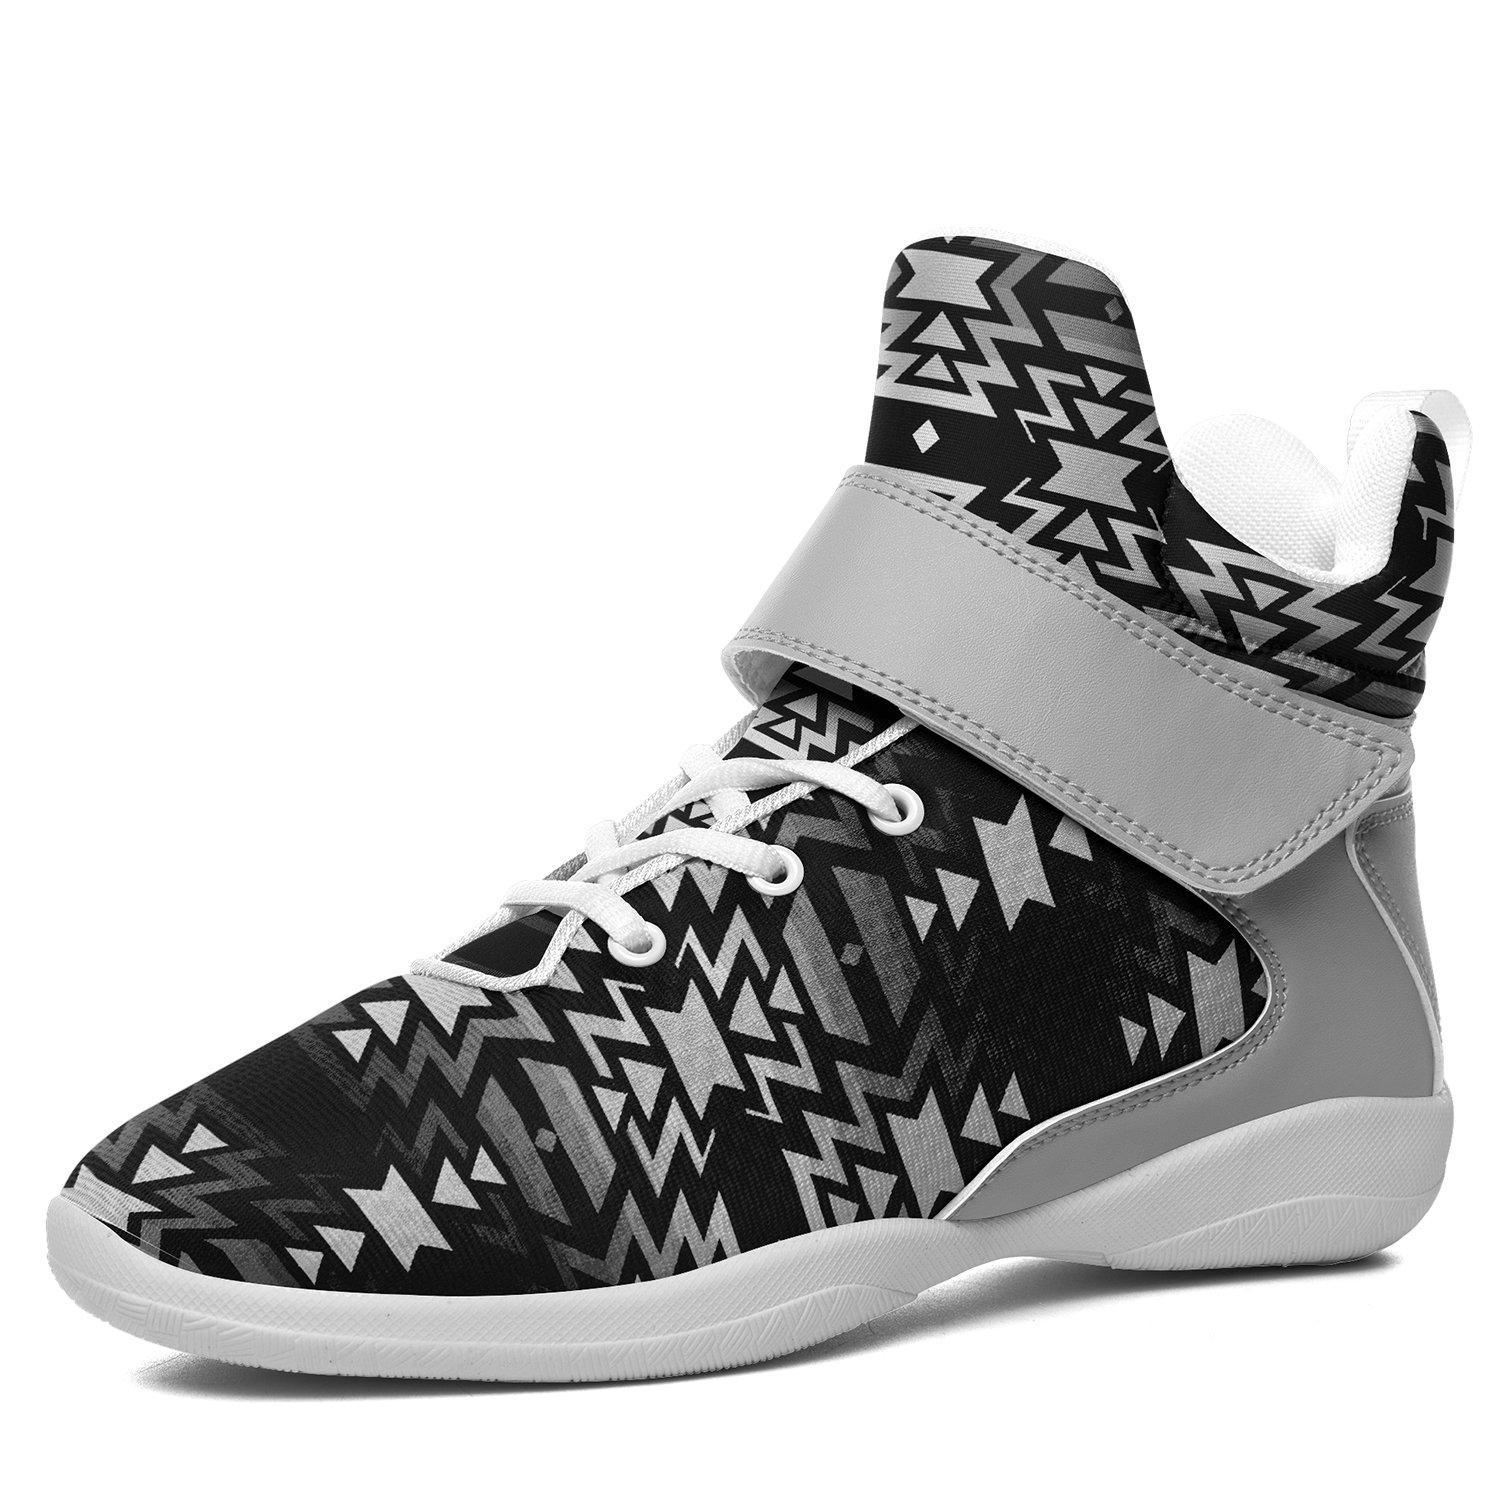 Black Fire Black and White Ipottaa Basketball / Sport High Top Shoes - White Sole 49 Dzine US Women 8.5 / EUR 40 White Sole with Gray Strap 